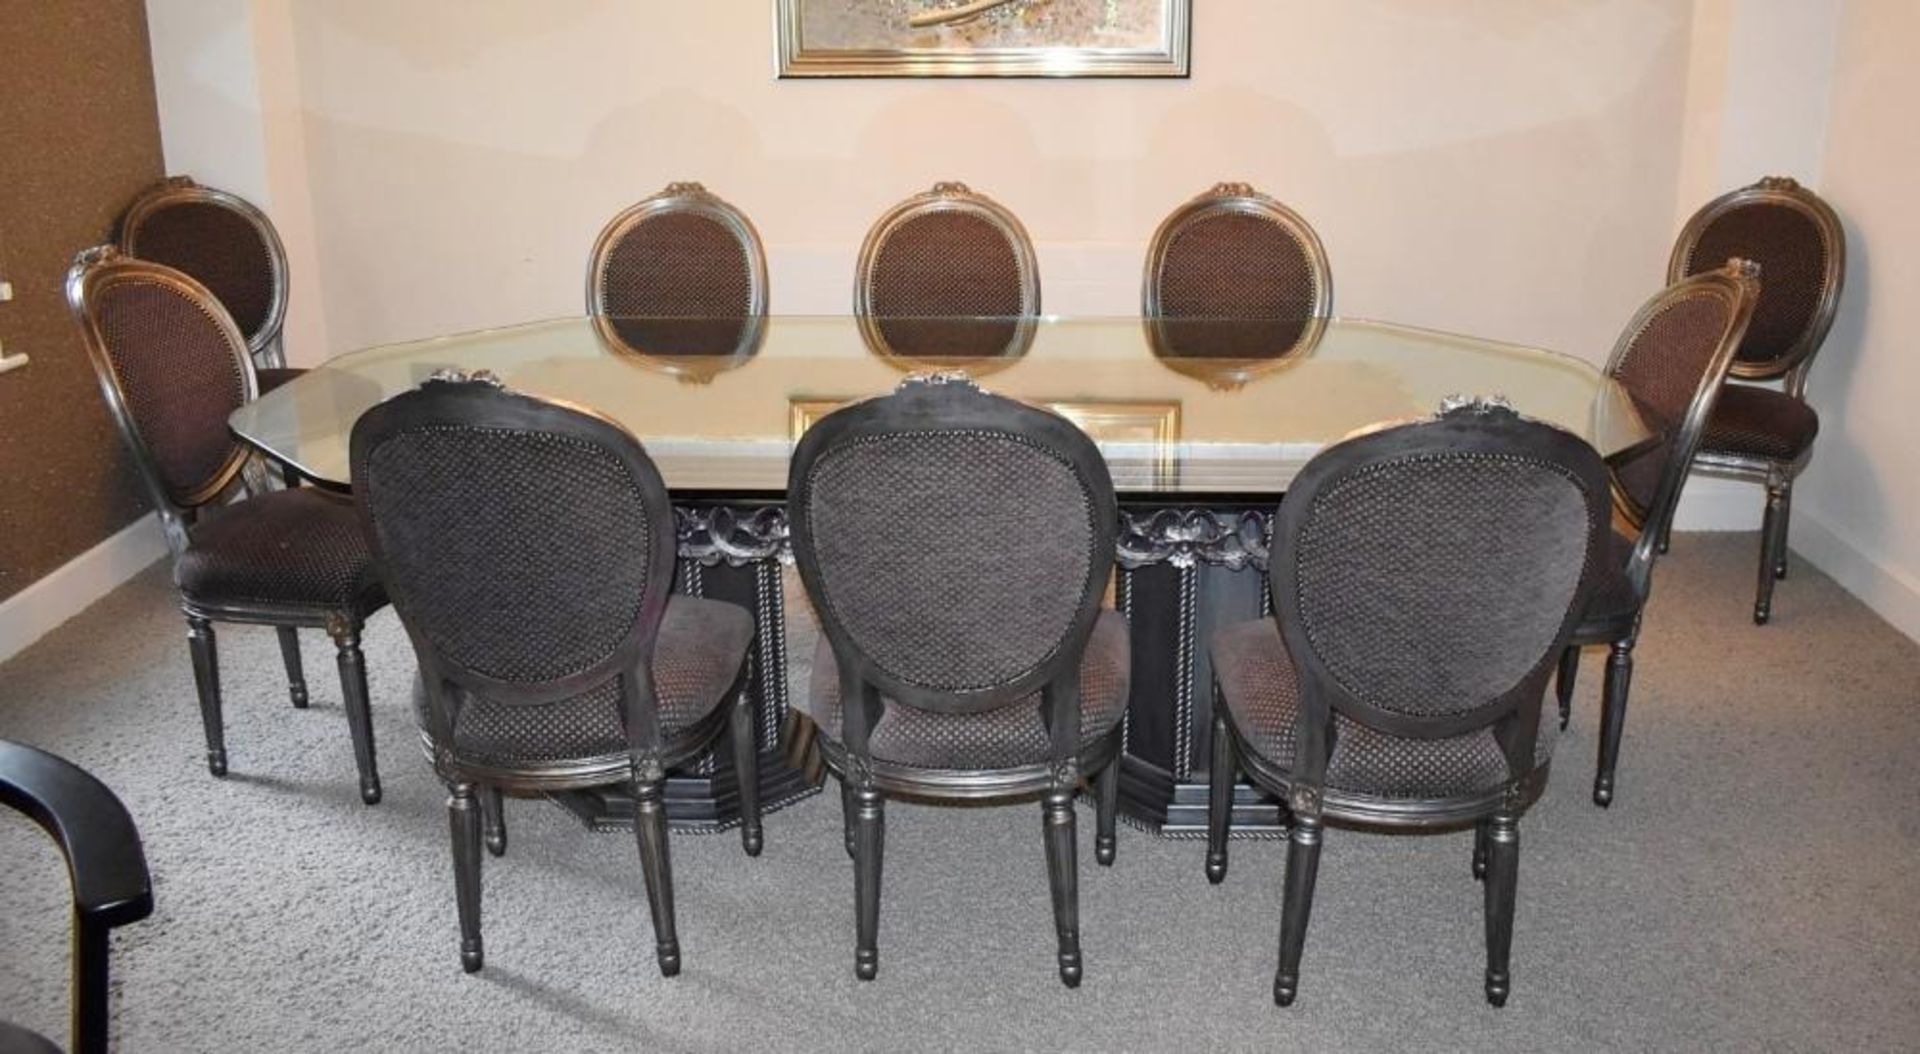 1 x Grand Glass Table With Baroque Legs And Chairs Set - CL407 - Location Bowdon WA14 - Image 2 of 21